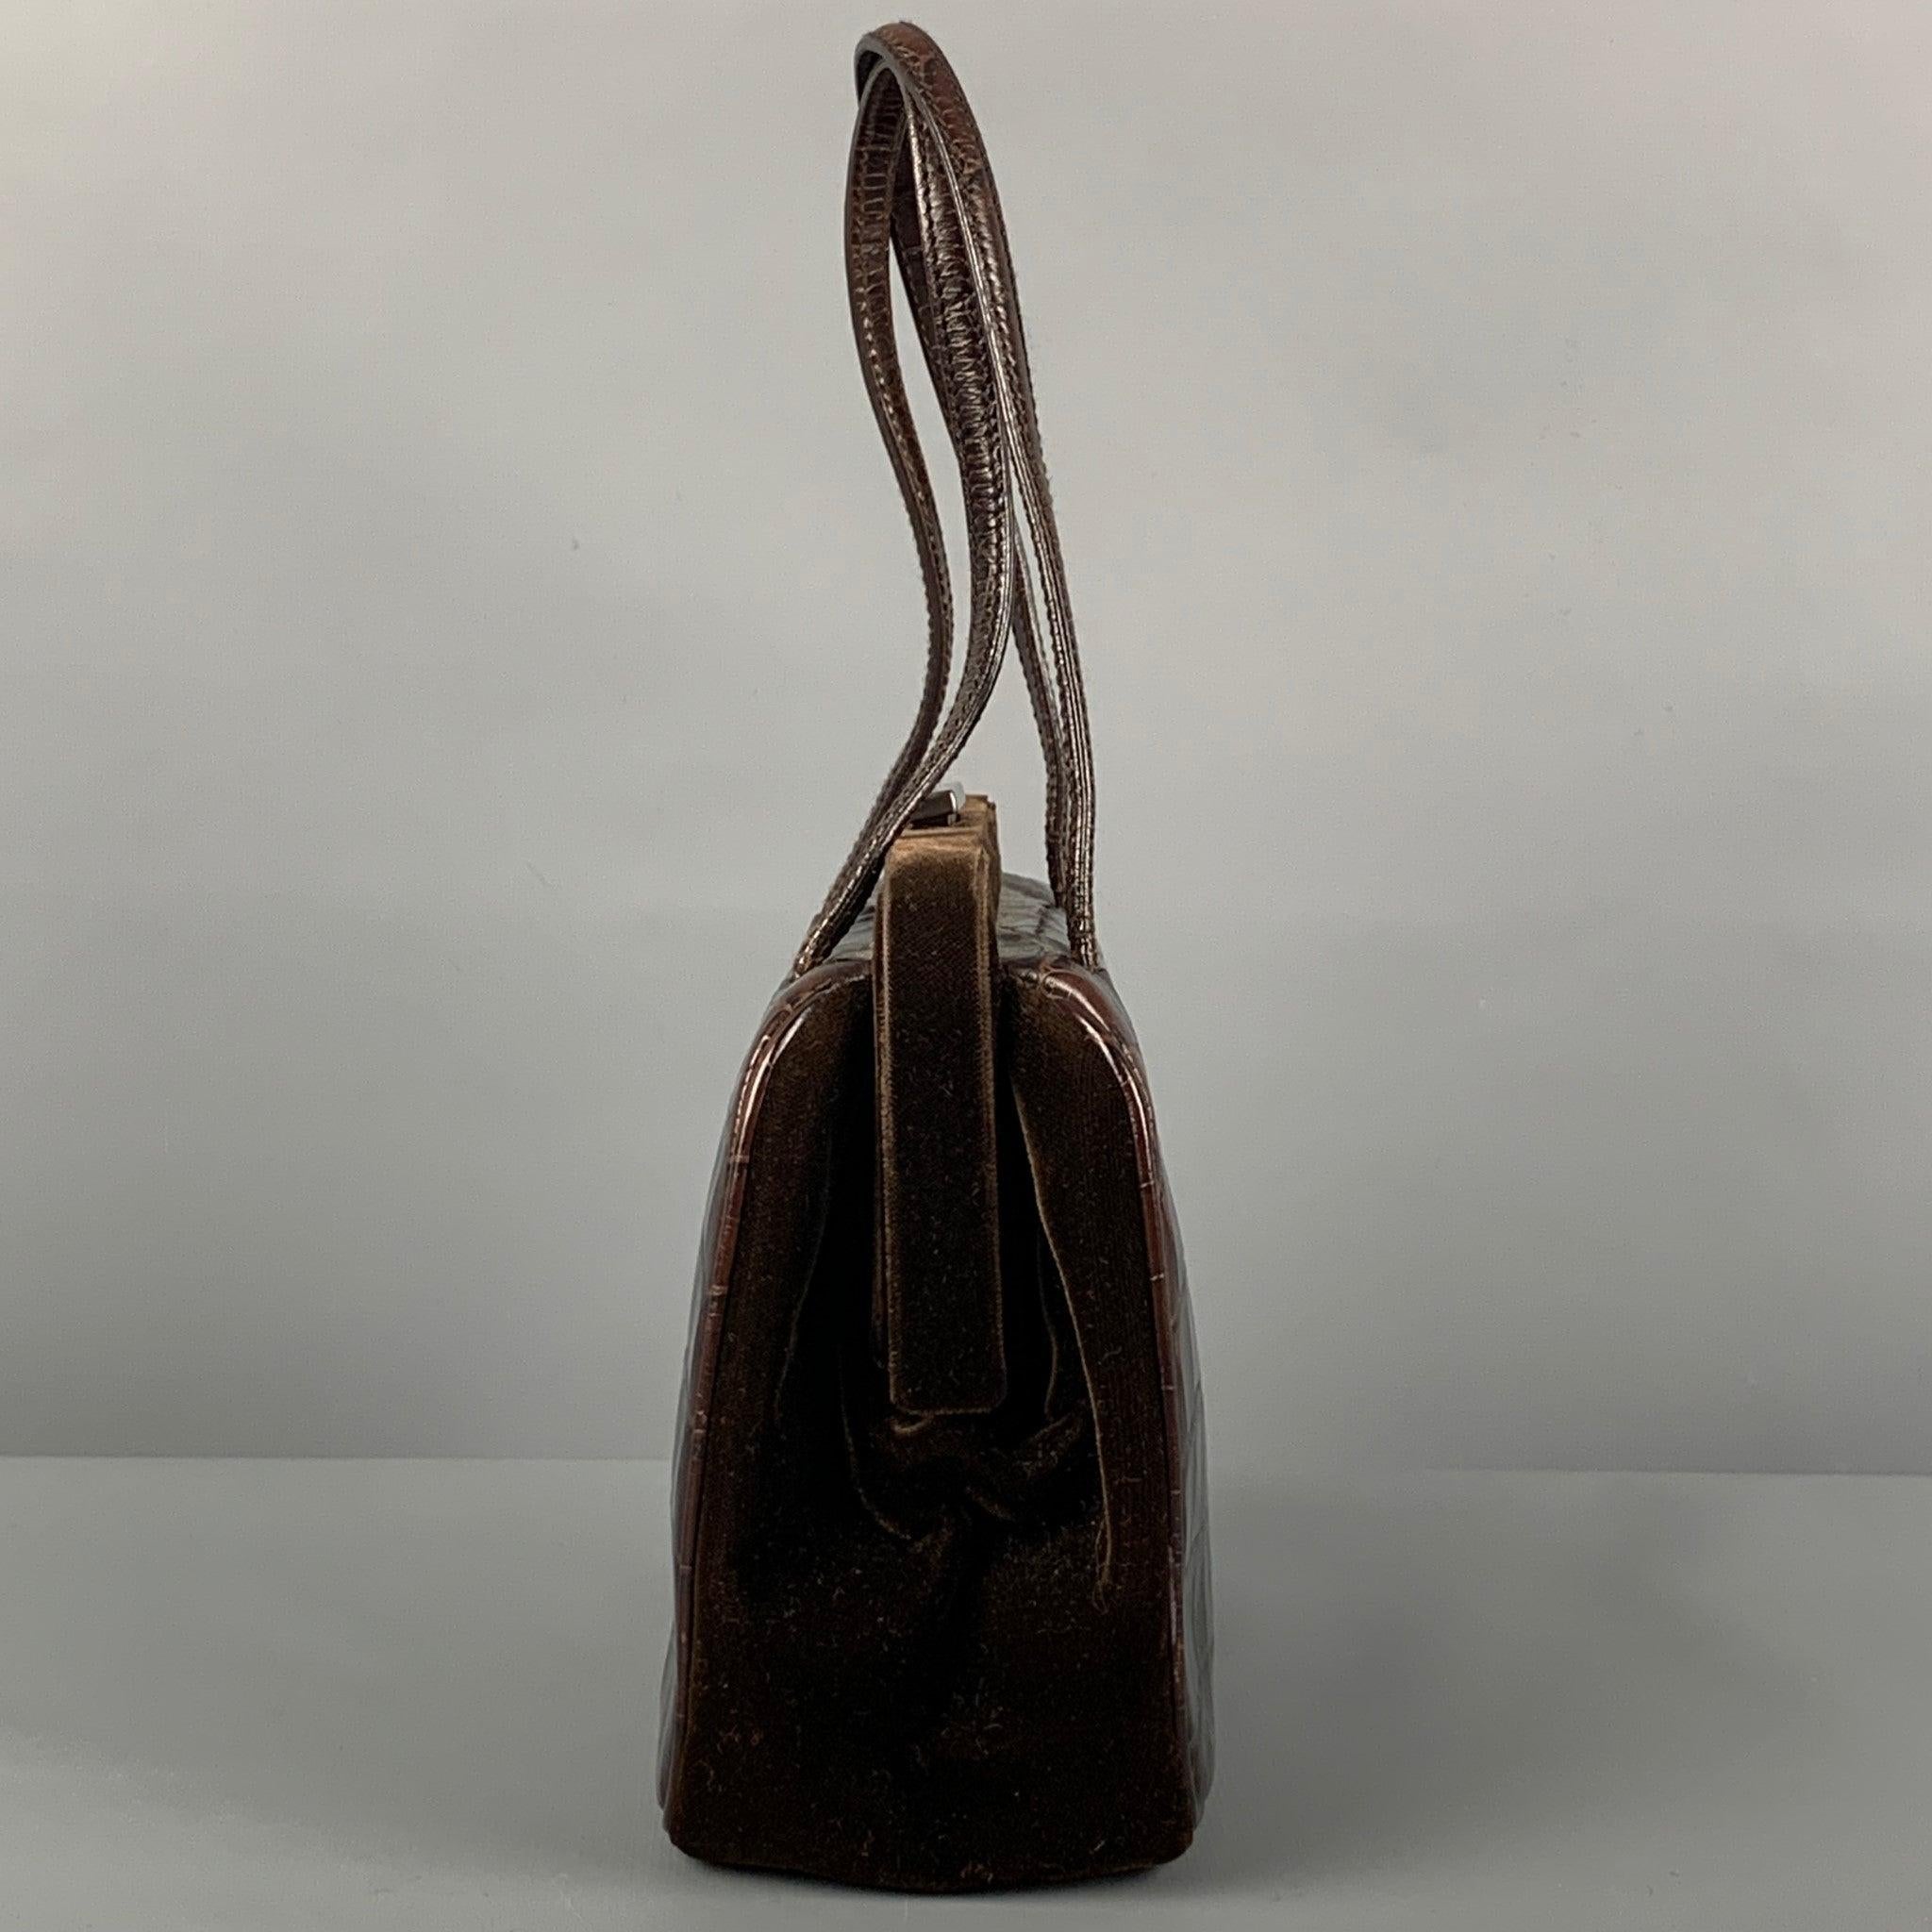 Rare Vintage PRADA mini handbag comes in a brown alligator leather featuring a velvet panel, top handles, inner pocket, and a push open closure. Made in Italy.
Very Good
Pre-Owned Condition. 

Marked:   43 

Measurements: 
  Length: 7 inches  Width: